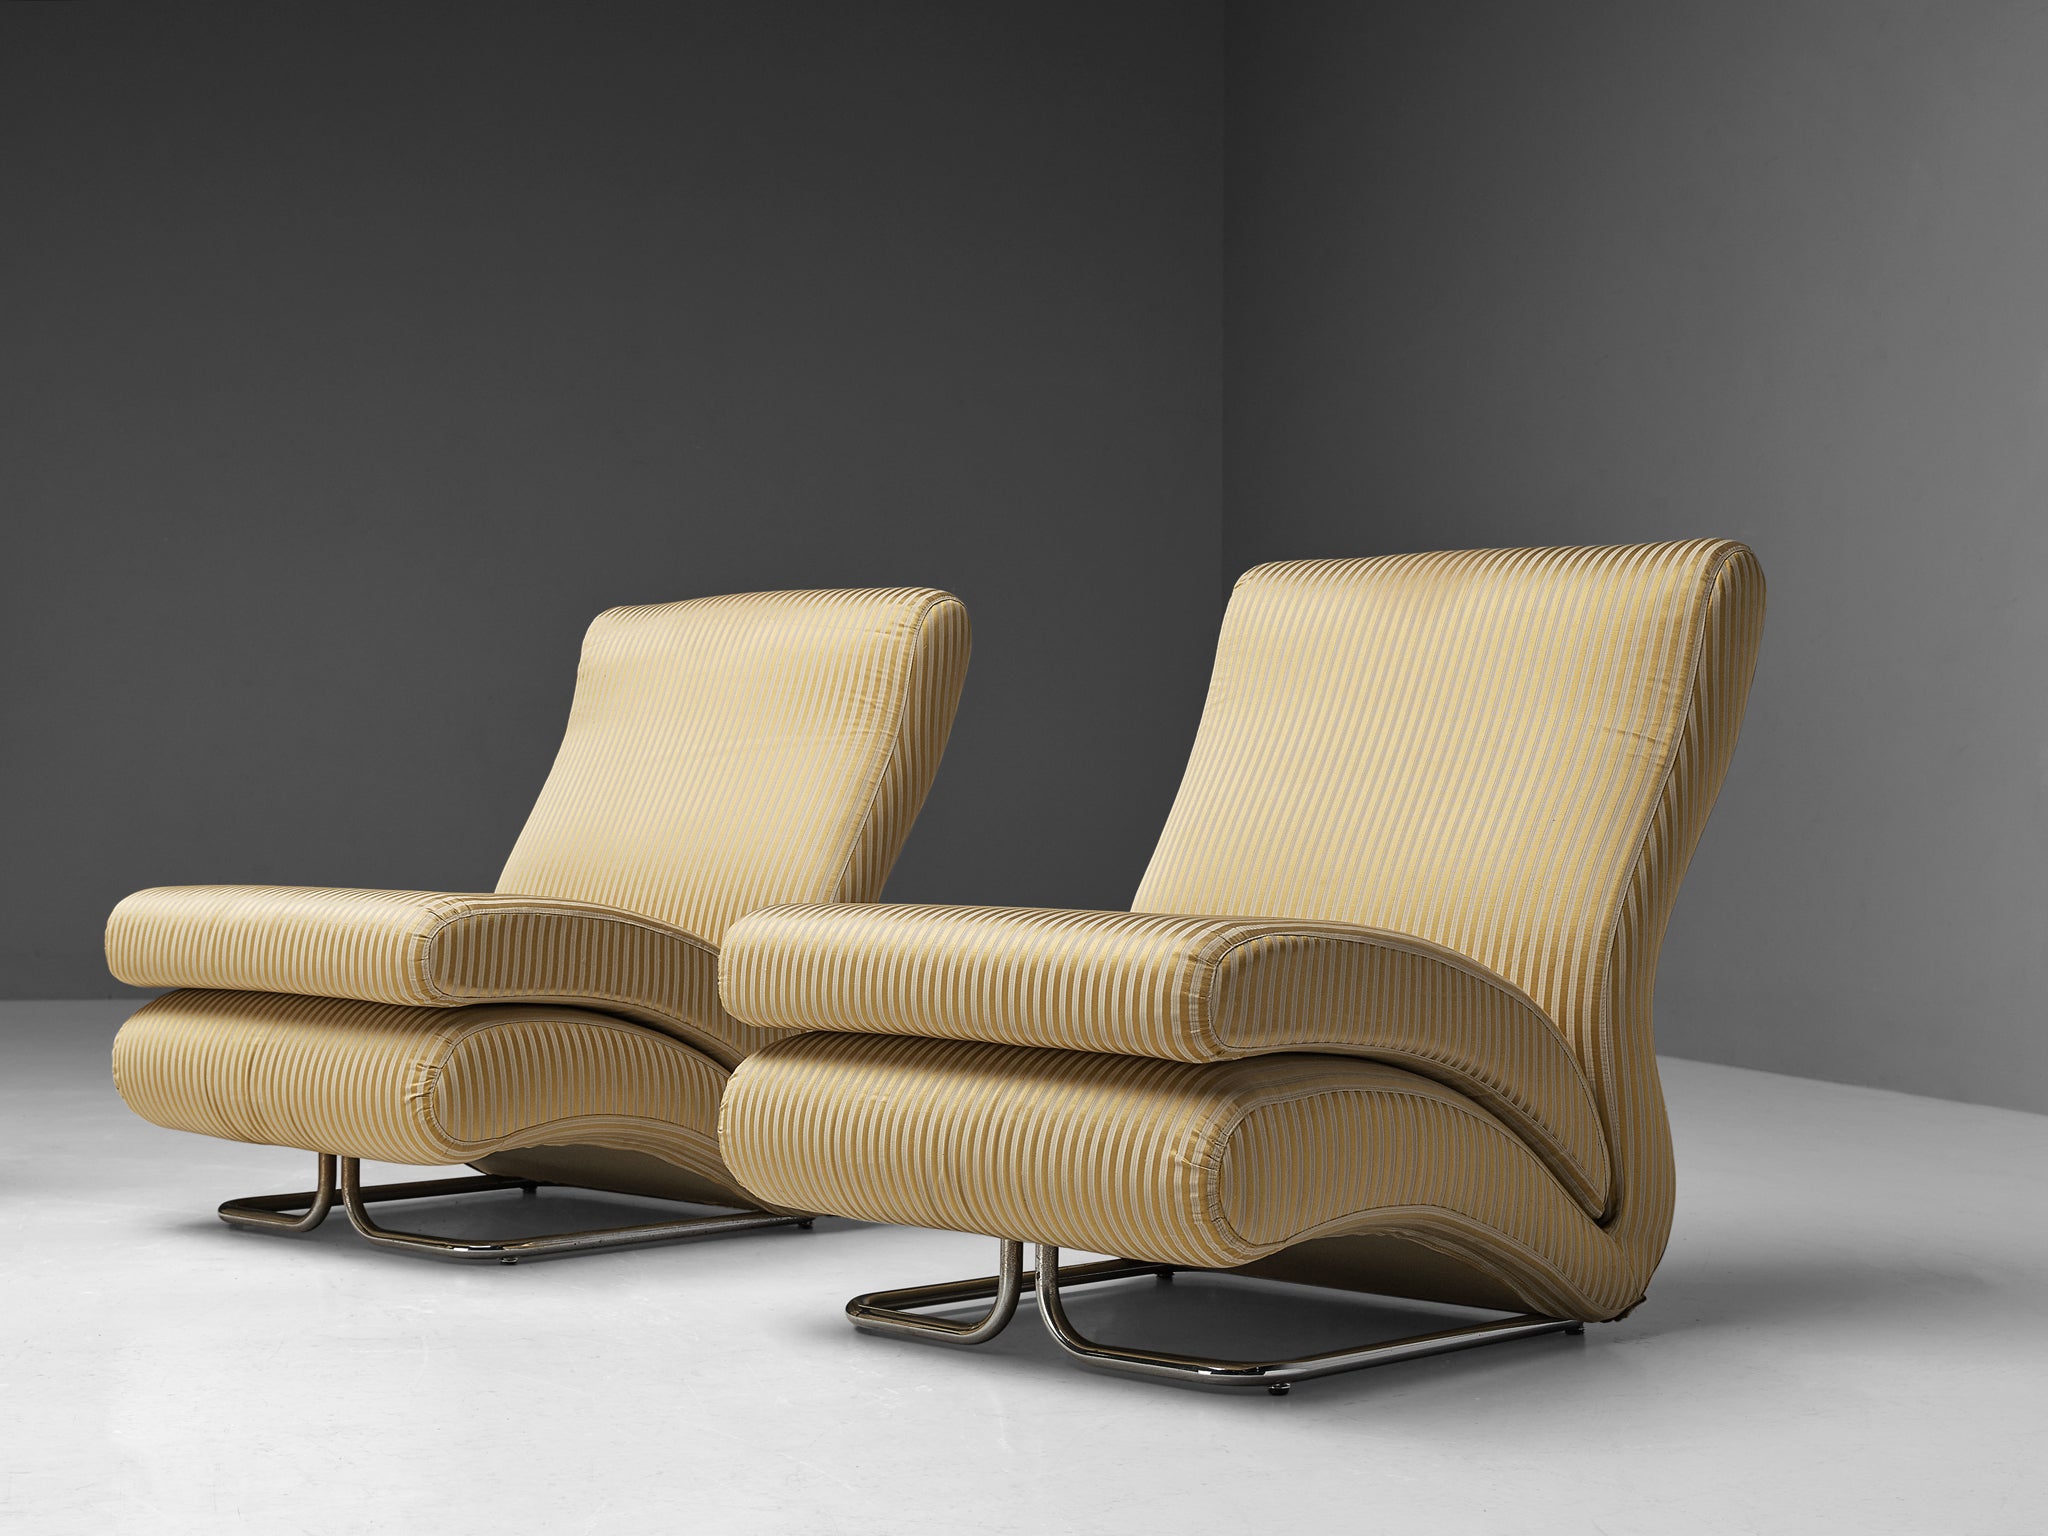 Vittorio Varo for I.P.E. 'Cigno' Lounge Chairs in Striped Upholstery